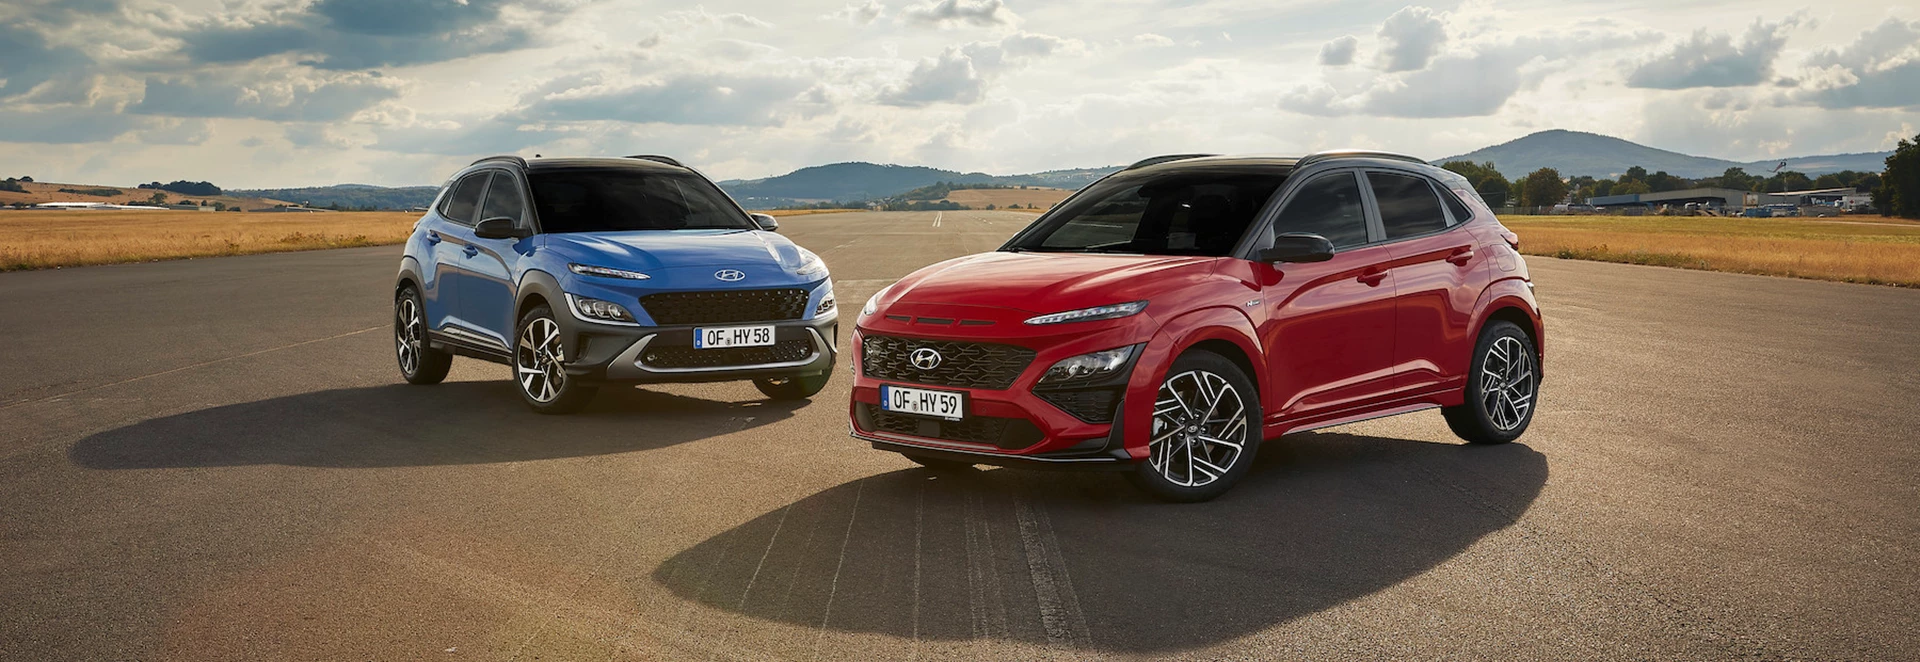 Hyundai crossover and SUV range: What’s available? 